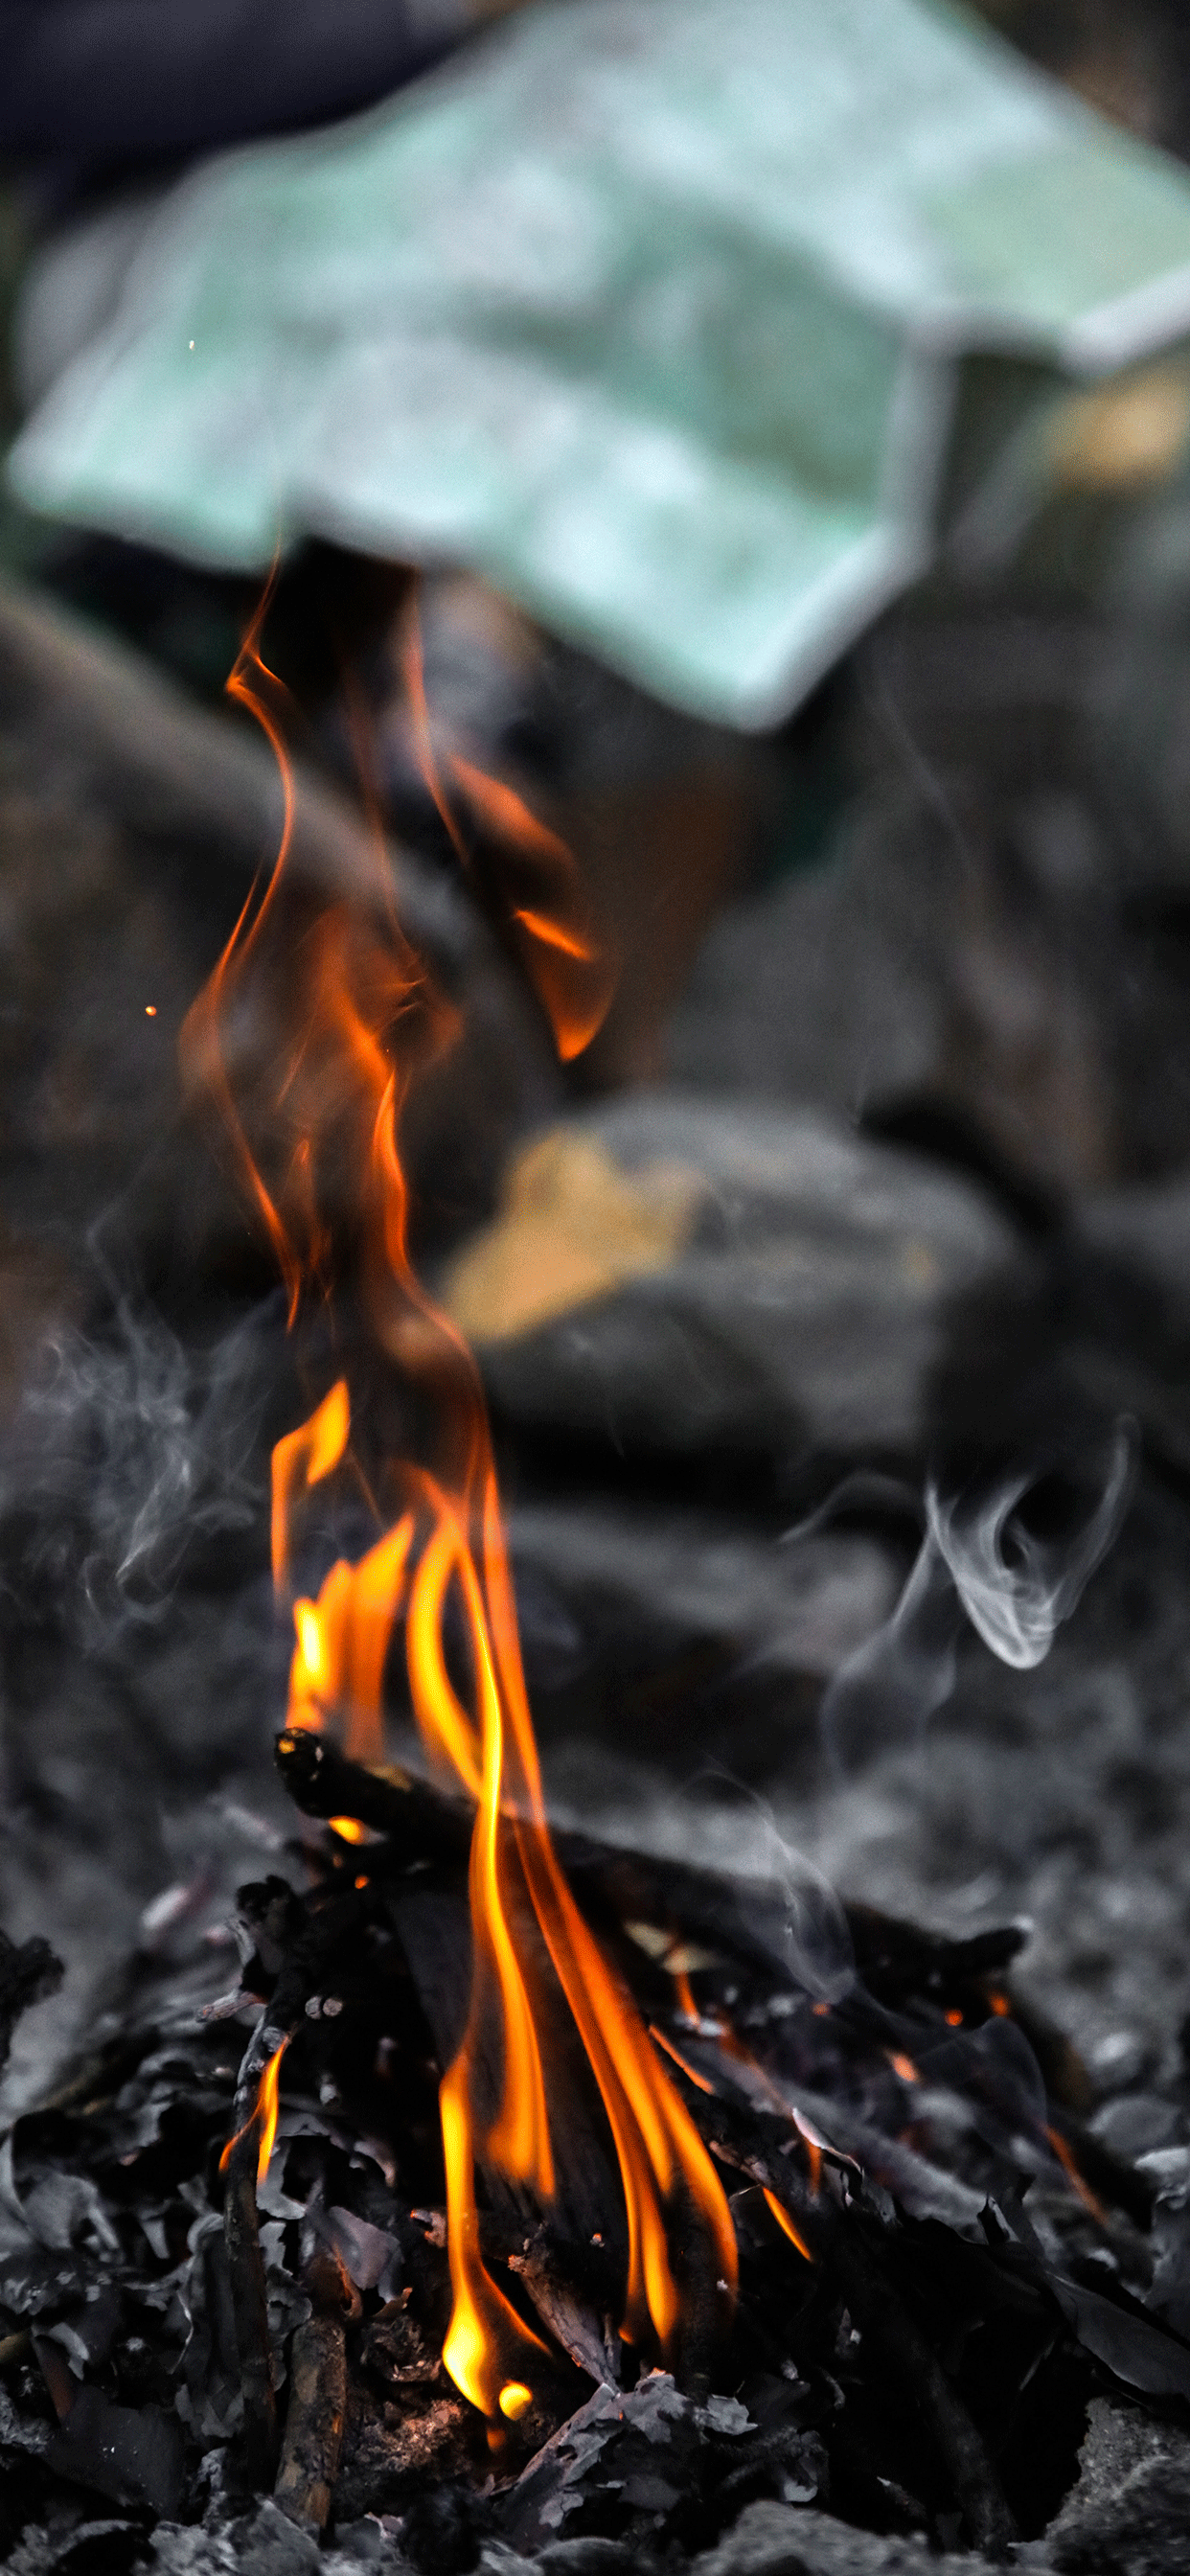 A close-up of a small fire burning in a pile of ash and leaves. - Fire